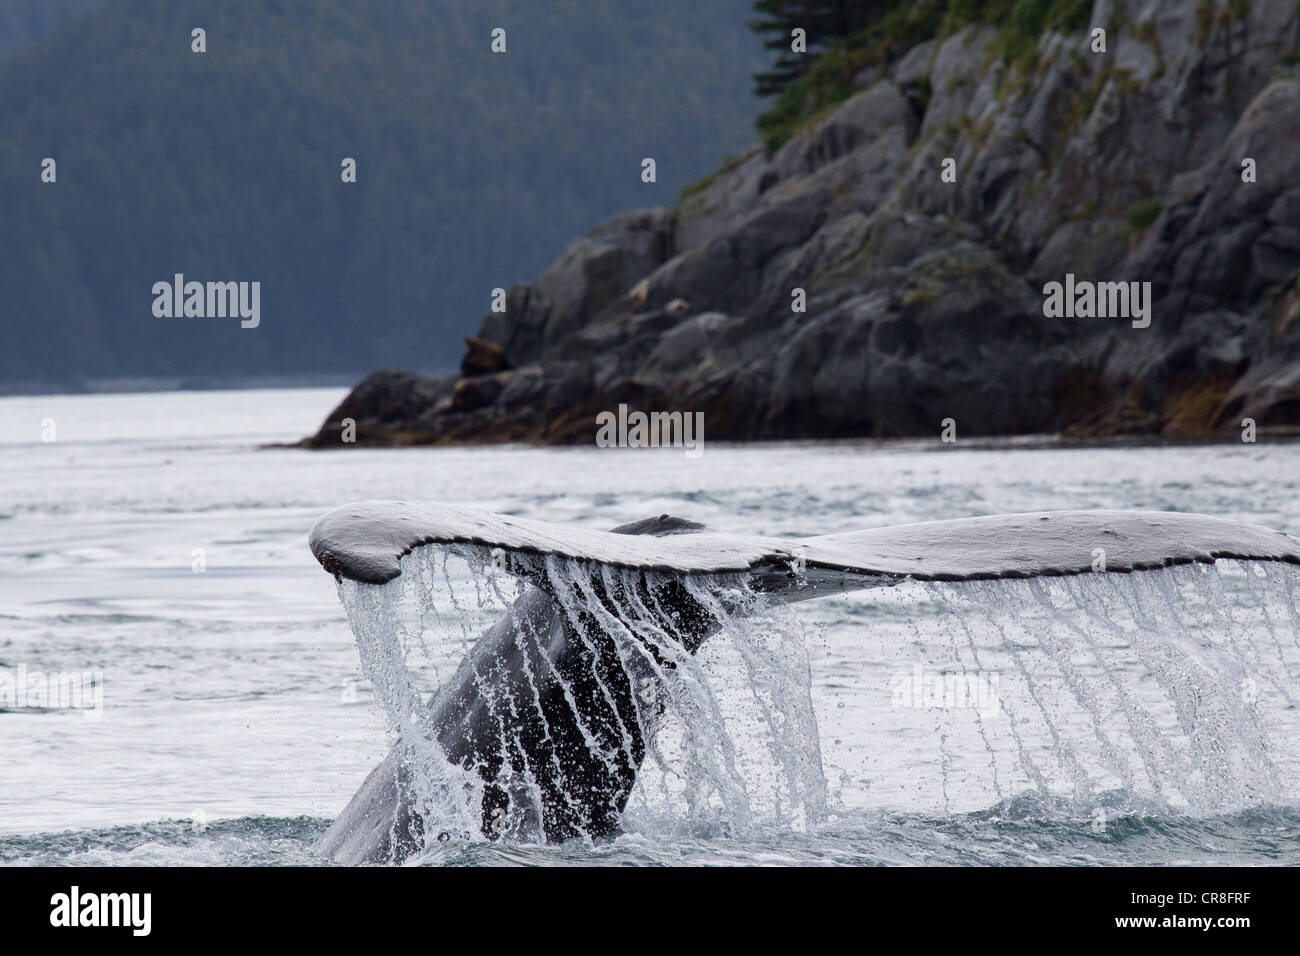 Tail of Humpback Whale Stock Photo